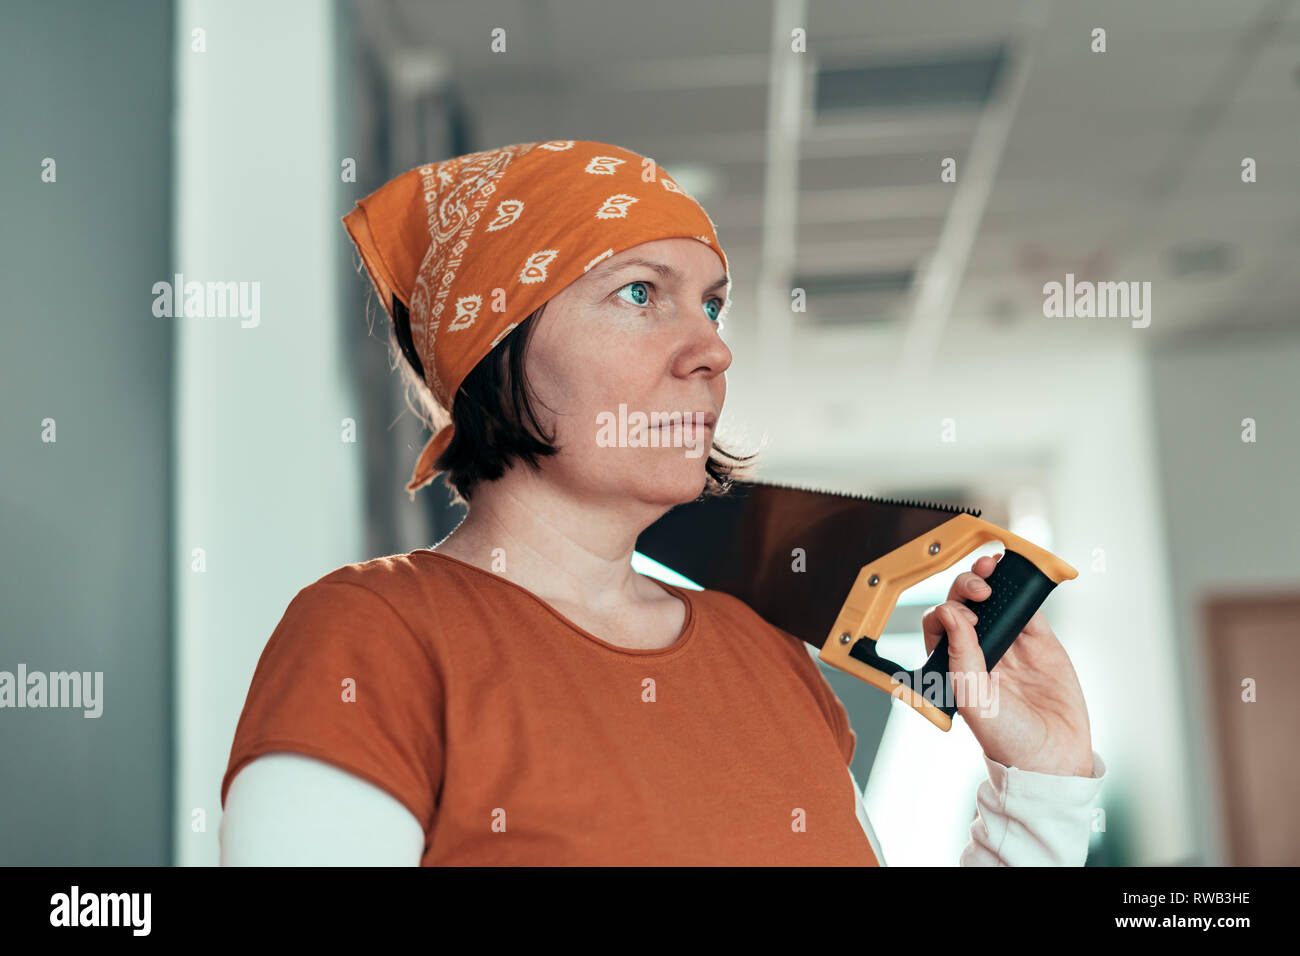 Self employed female carpenter with crosscut hand saw in her small business woodwork workshop Stock Photo